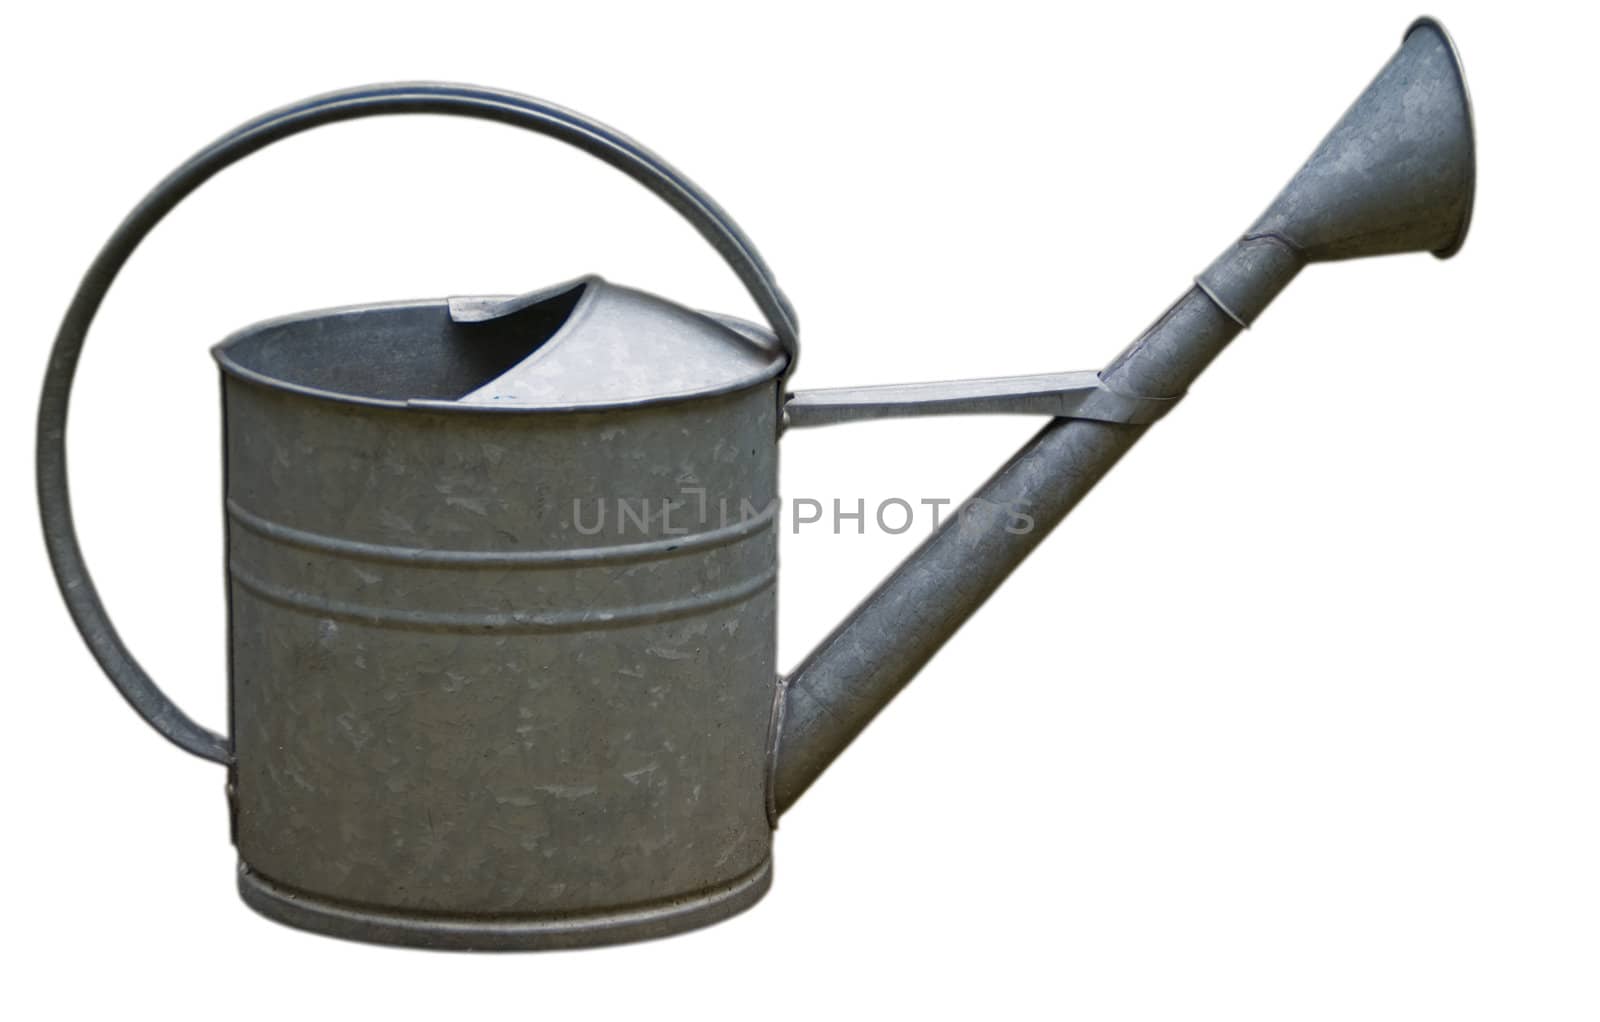 Watering can by Claudine